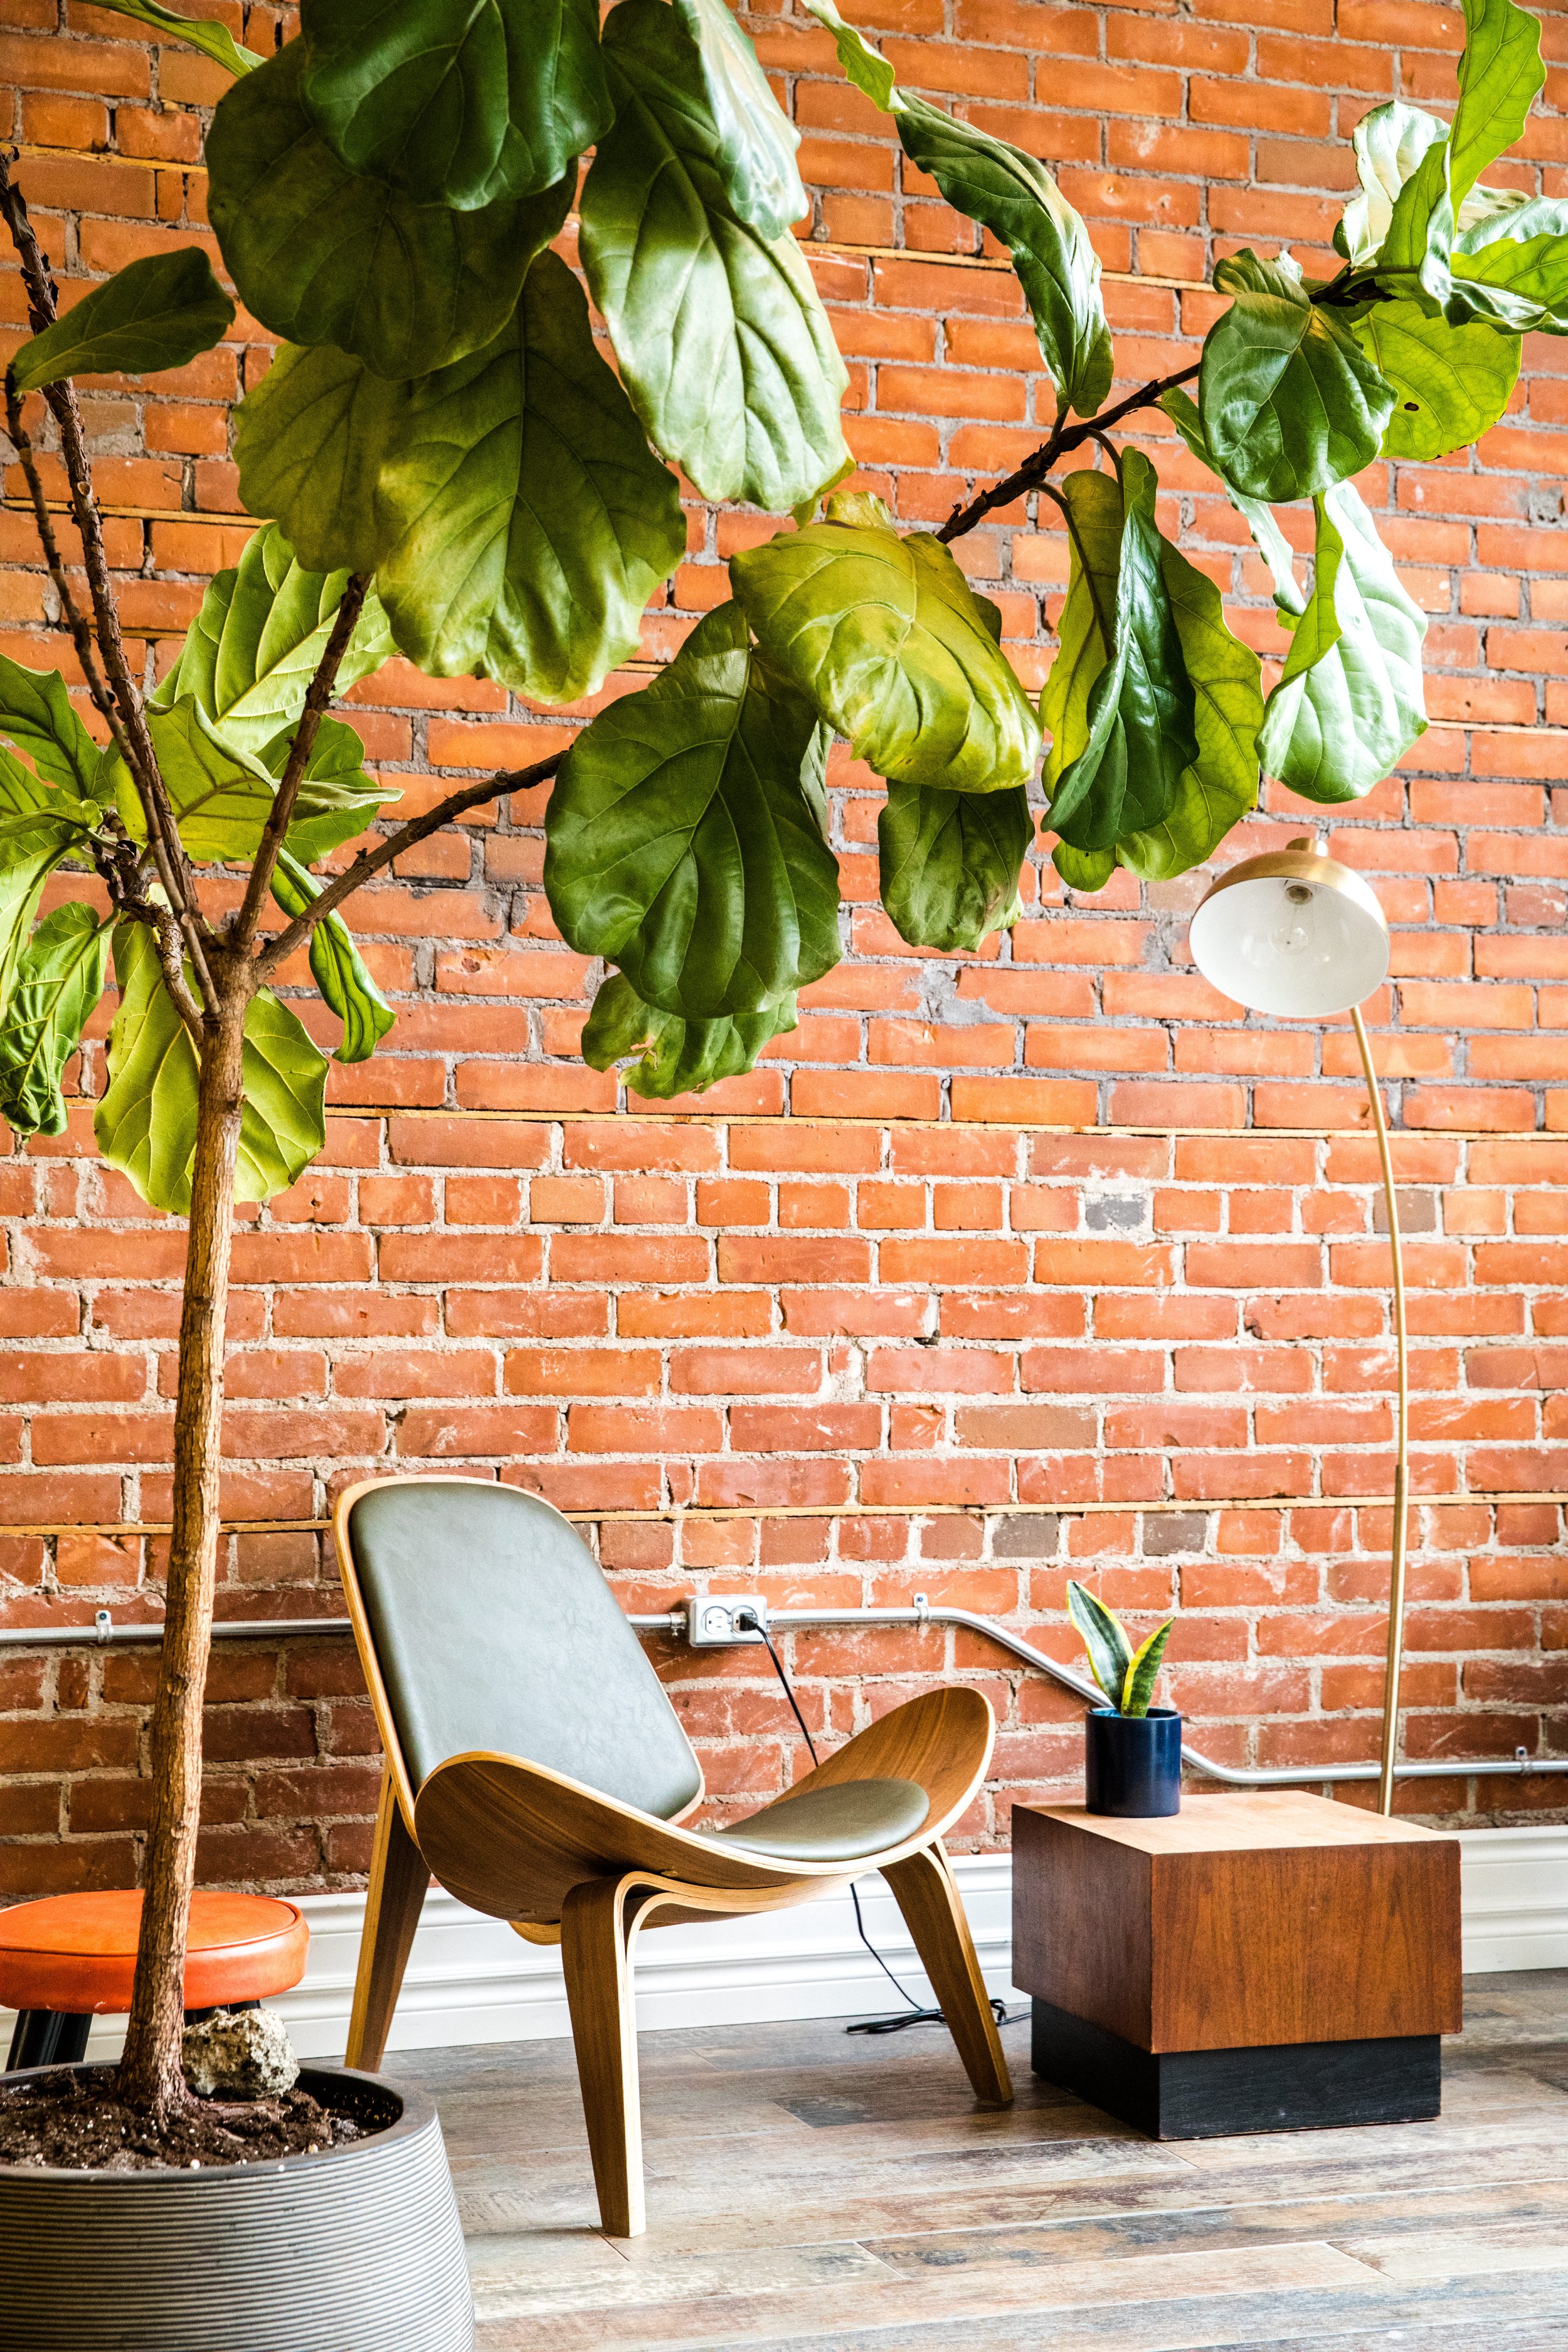 Fig tree and modern chair in waiting area